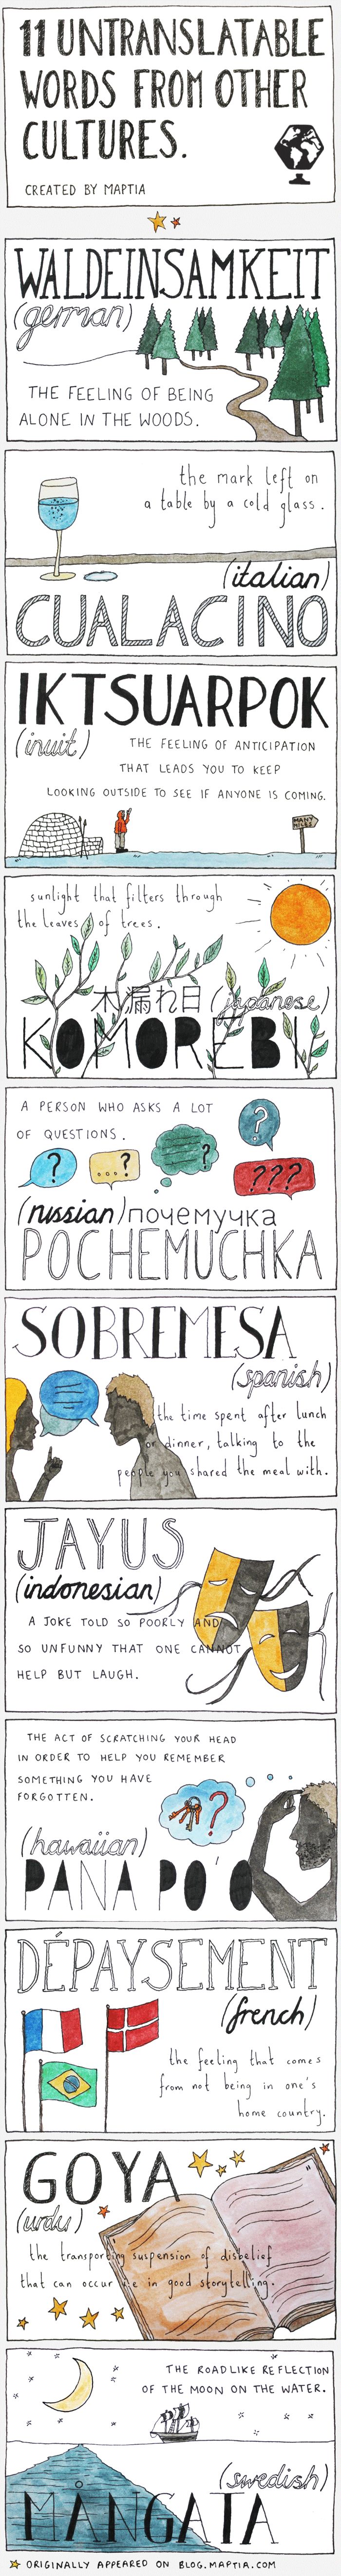 Untranslatable words from other languages.